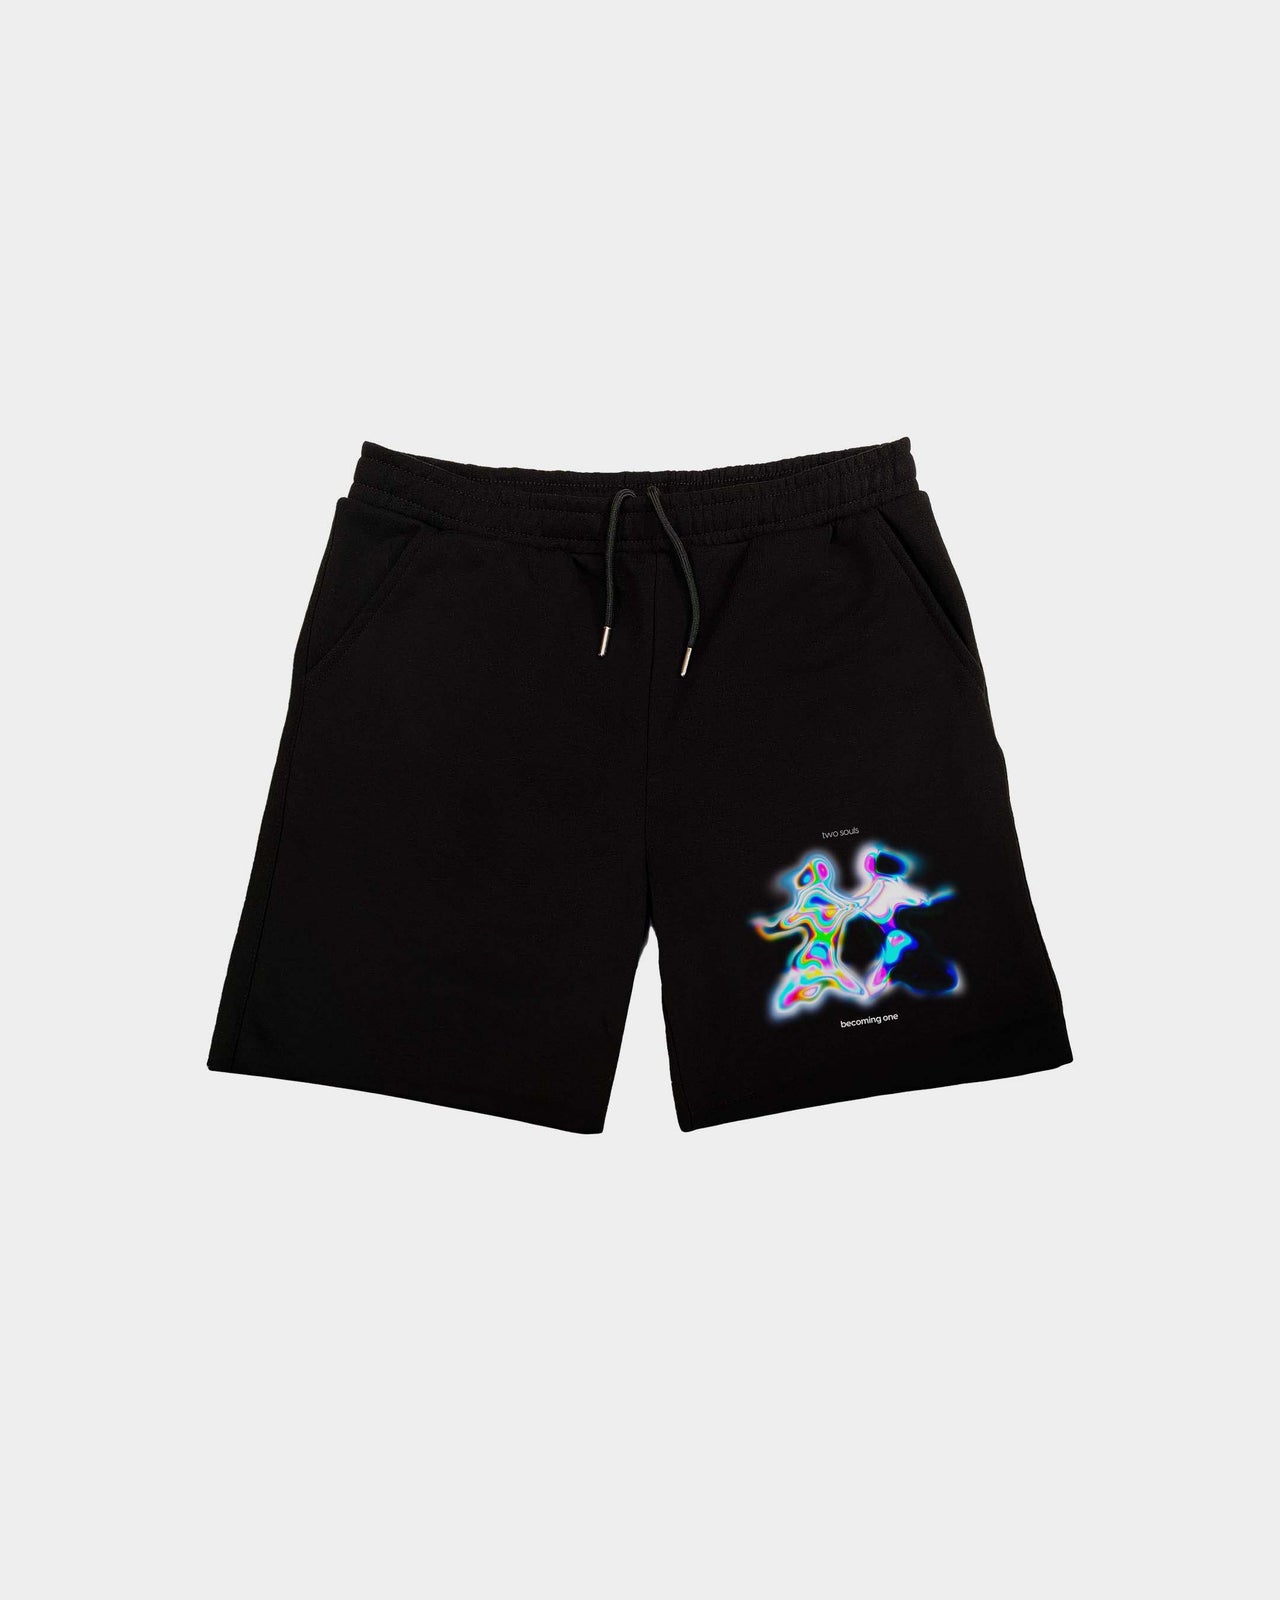 Two Souls Becoming One Men's Shorts